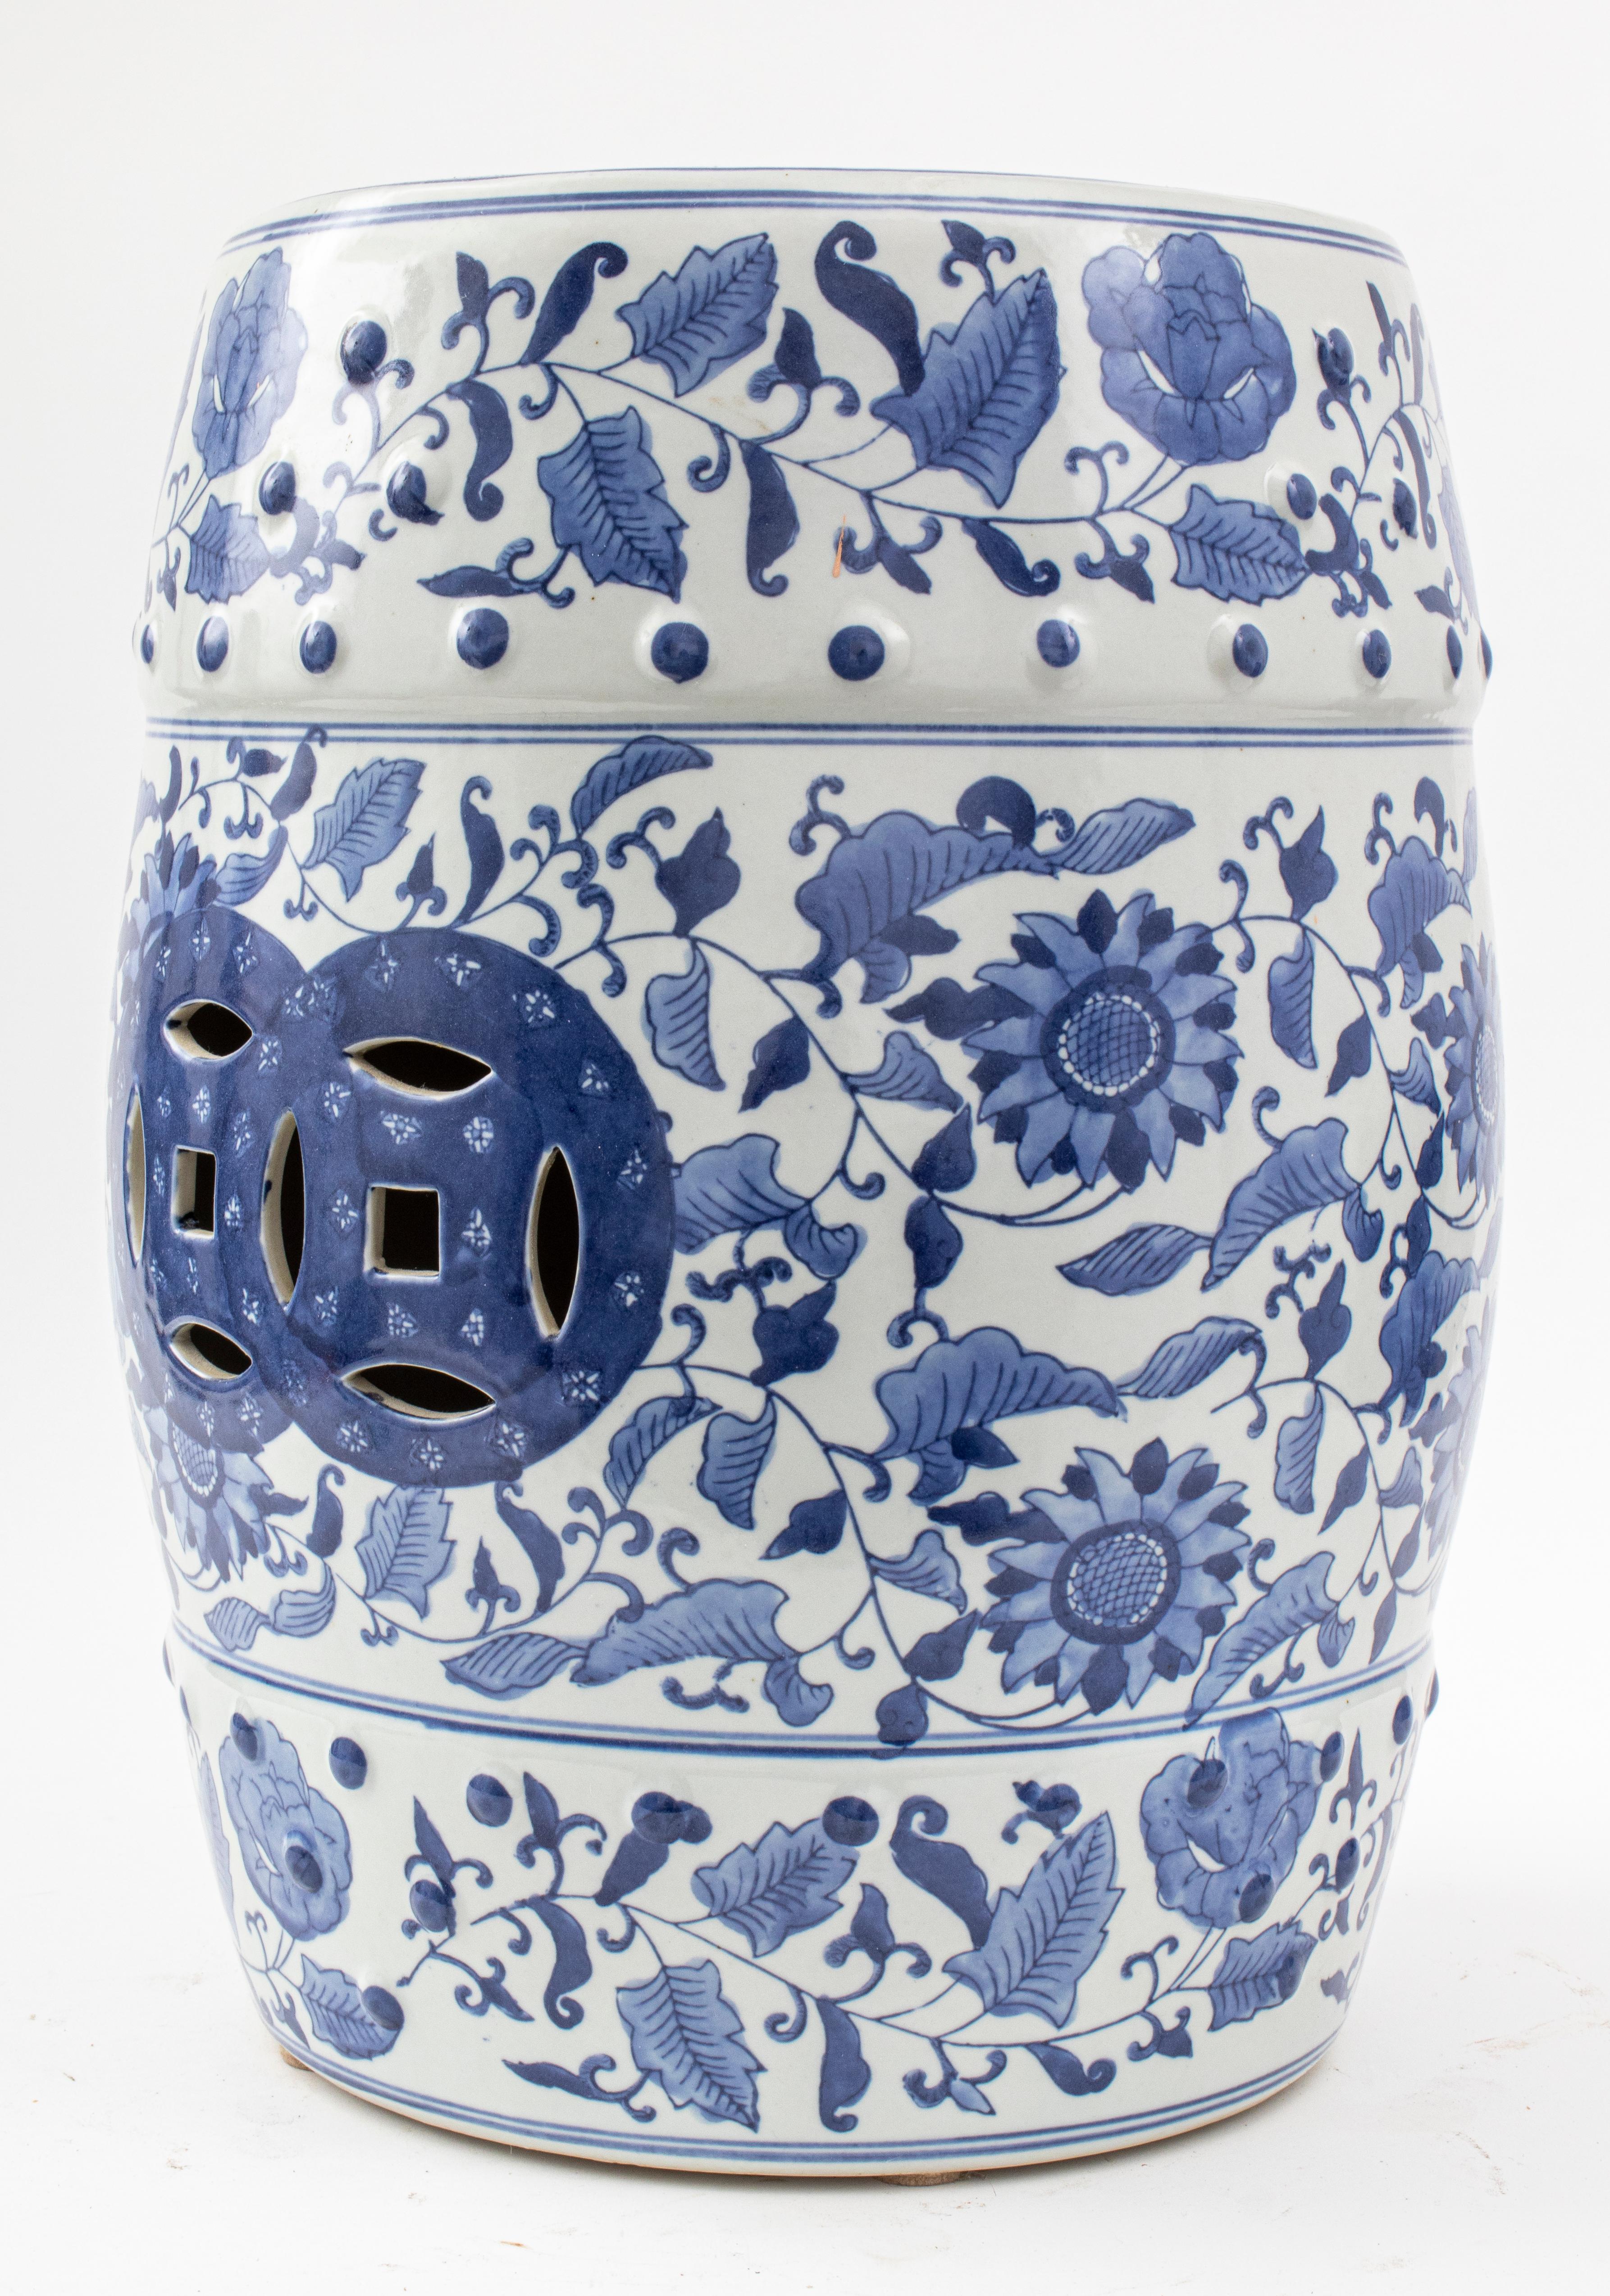 Chinese blue and white glazed ceramic pottery garden seat / stool decorated with scrolling foliate design and flowers. 

Measures: 18.5